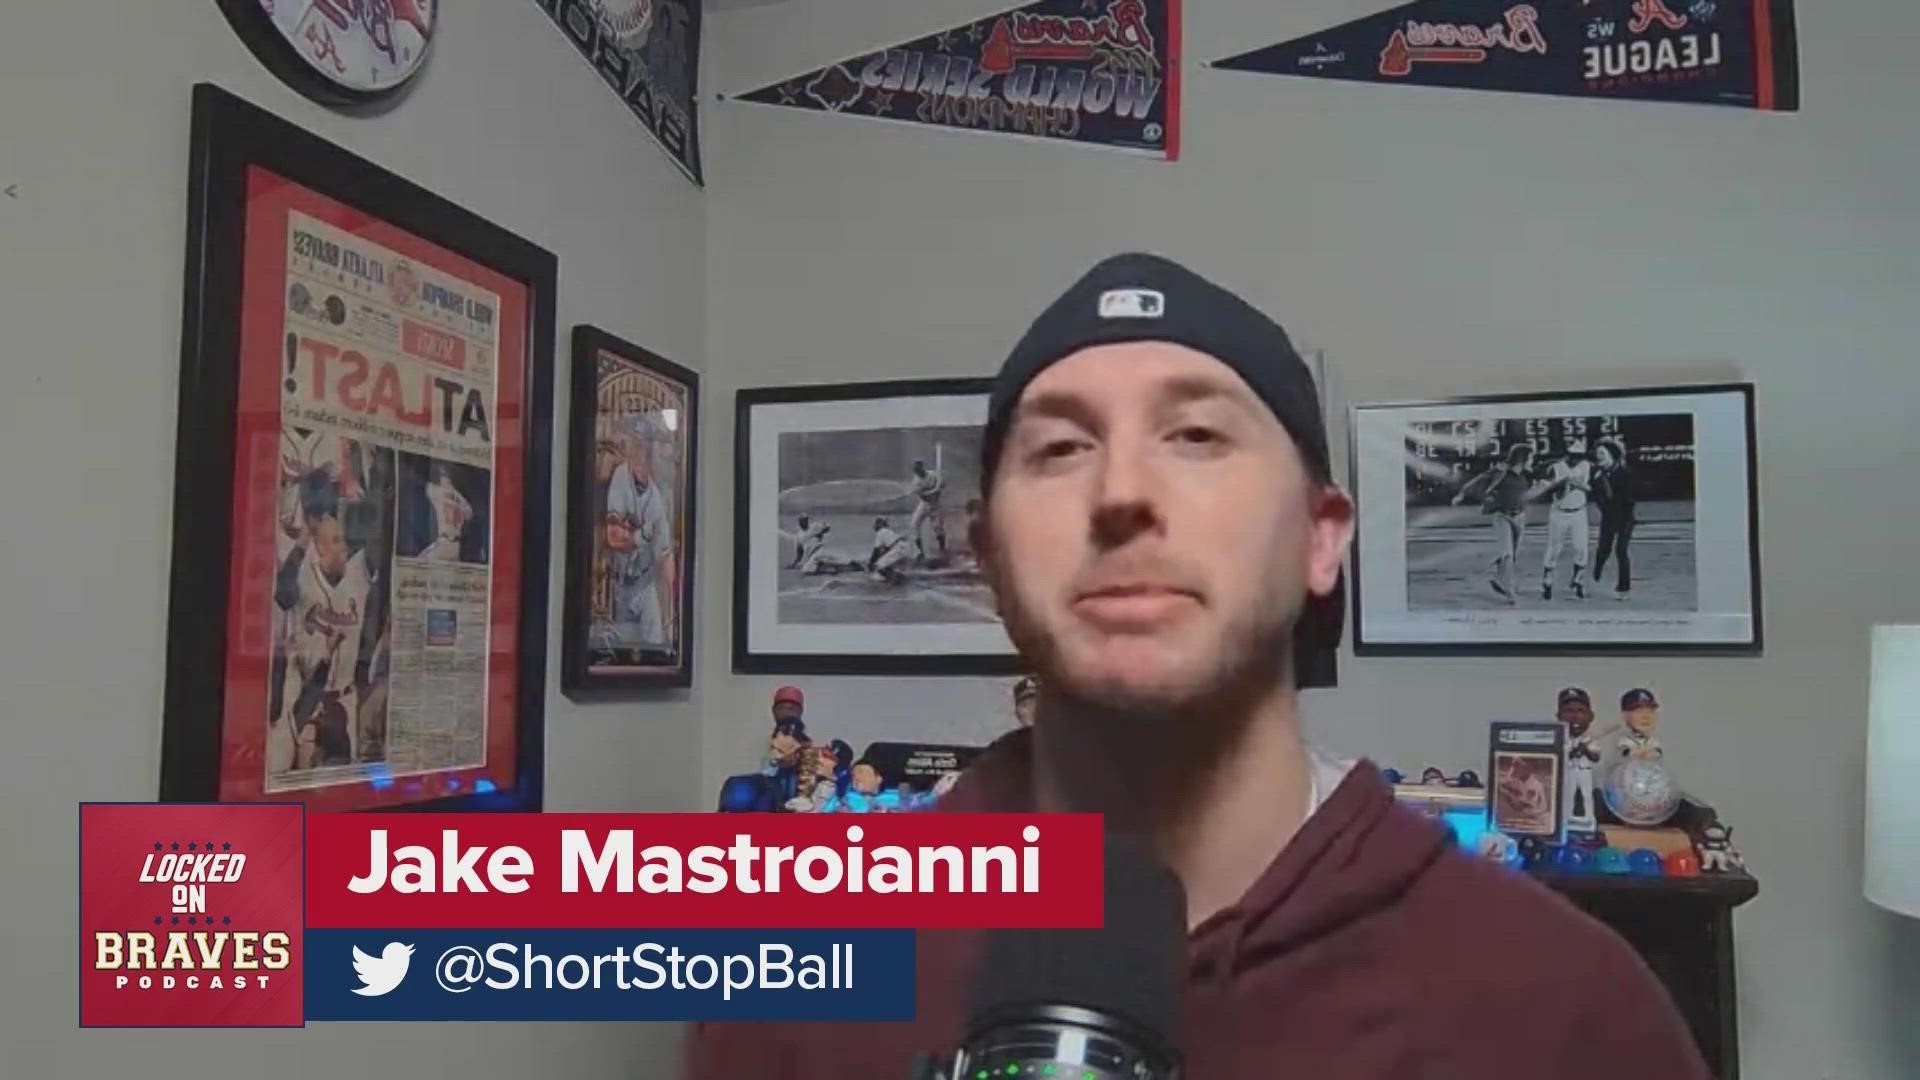 Locked On Braves host Jake Mastroianni reacts to the news that MLB's lockout is over.